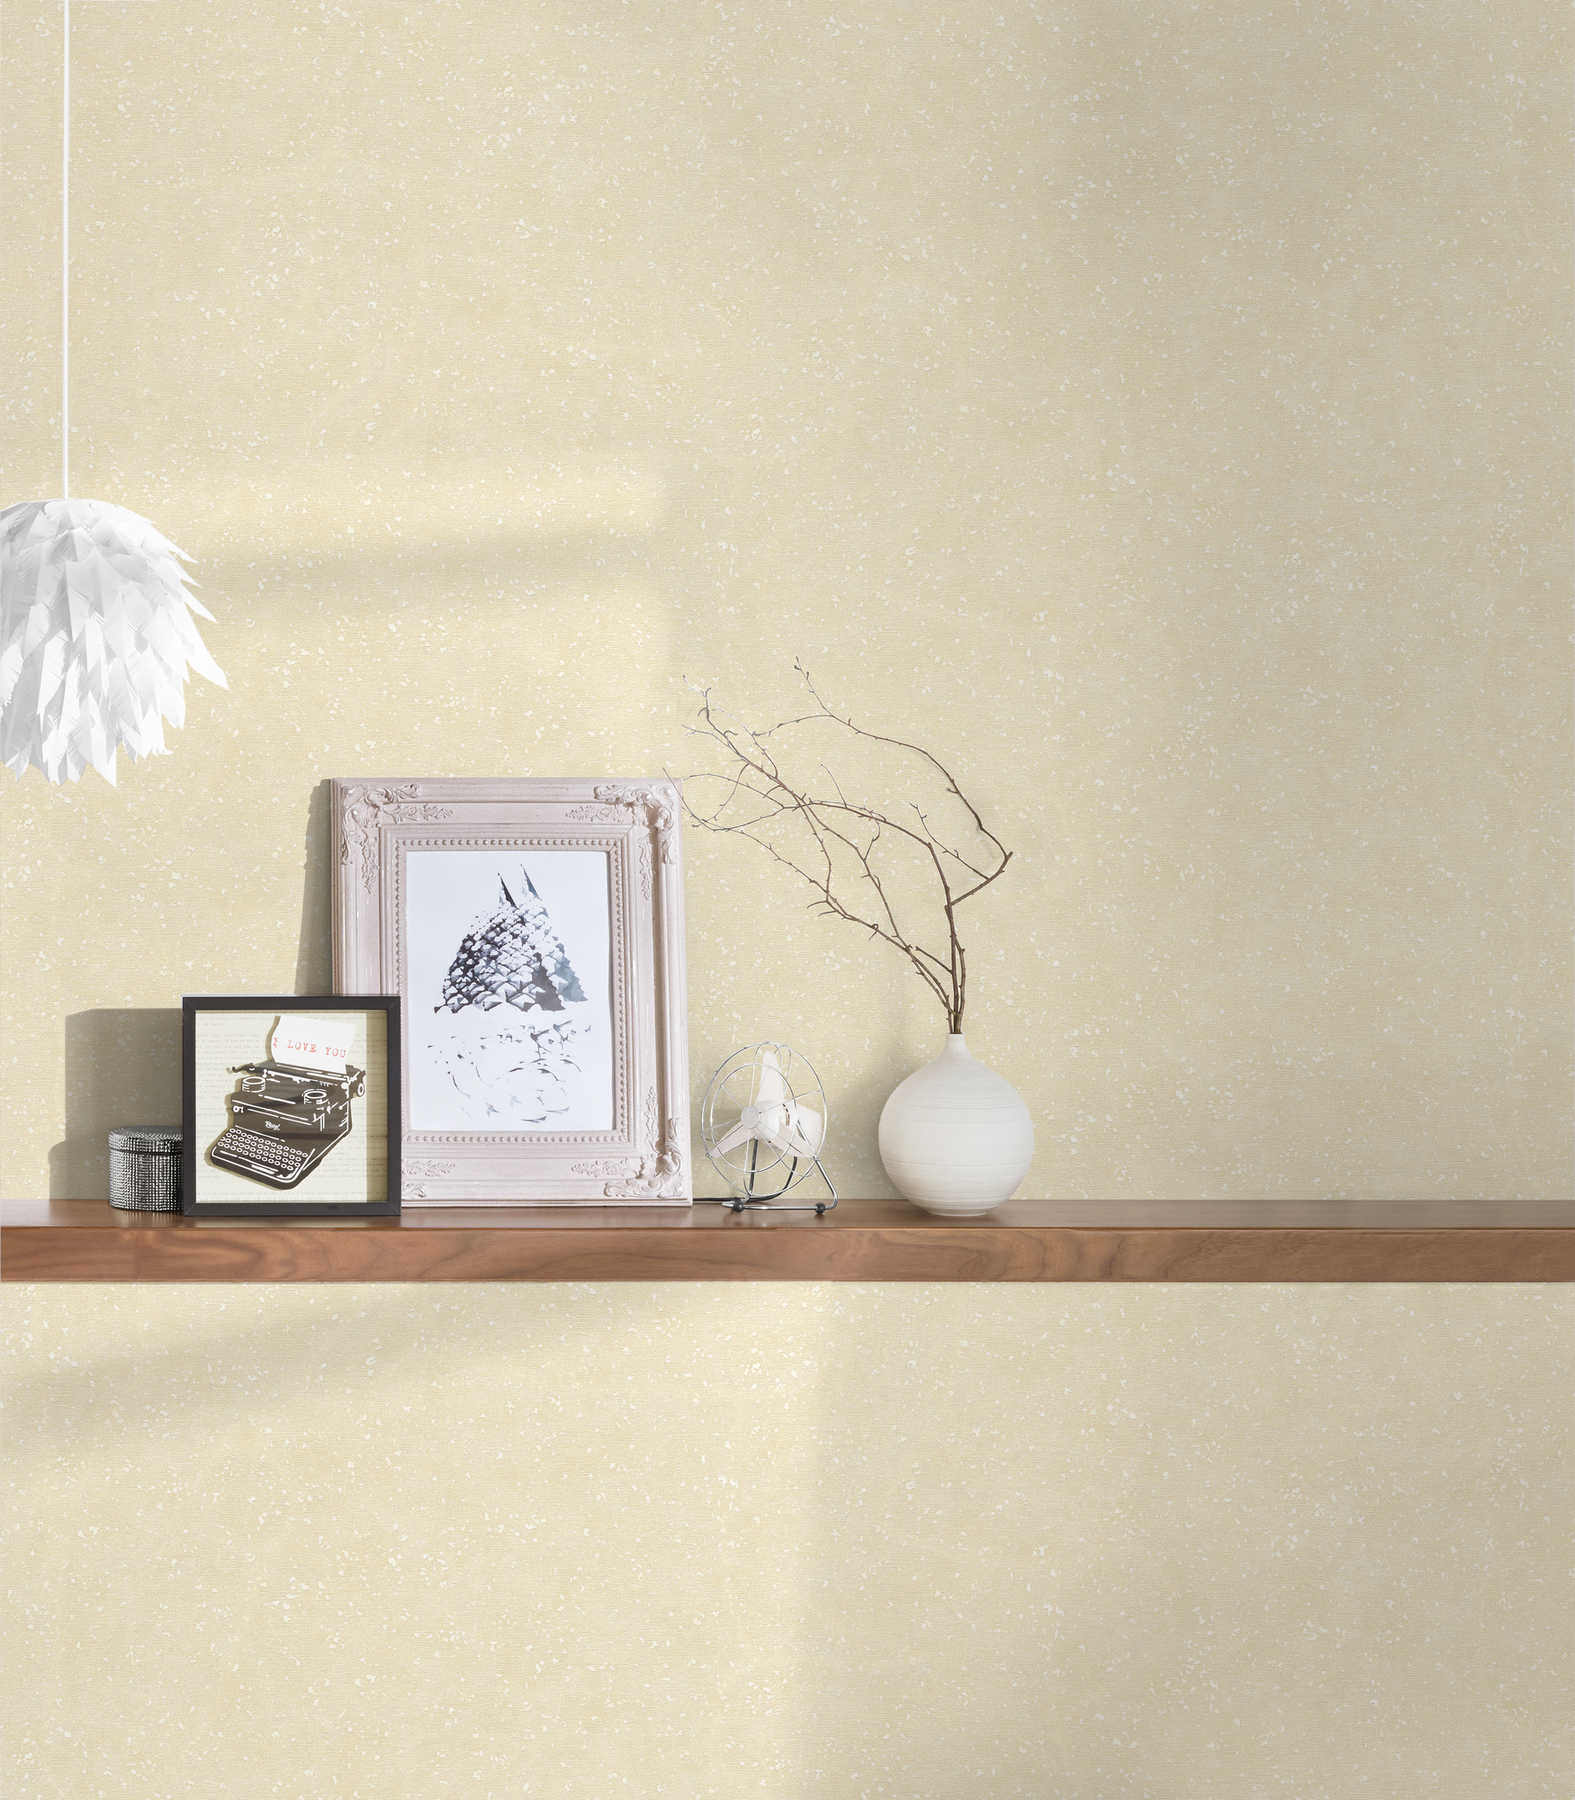             Cream non-woven wallpaper shaded, satin with texture effect
        